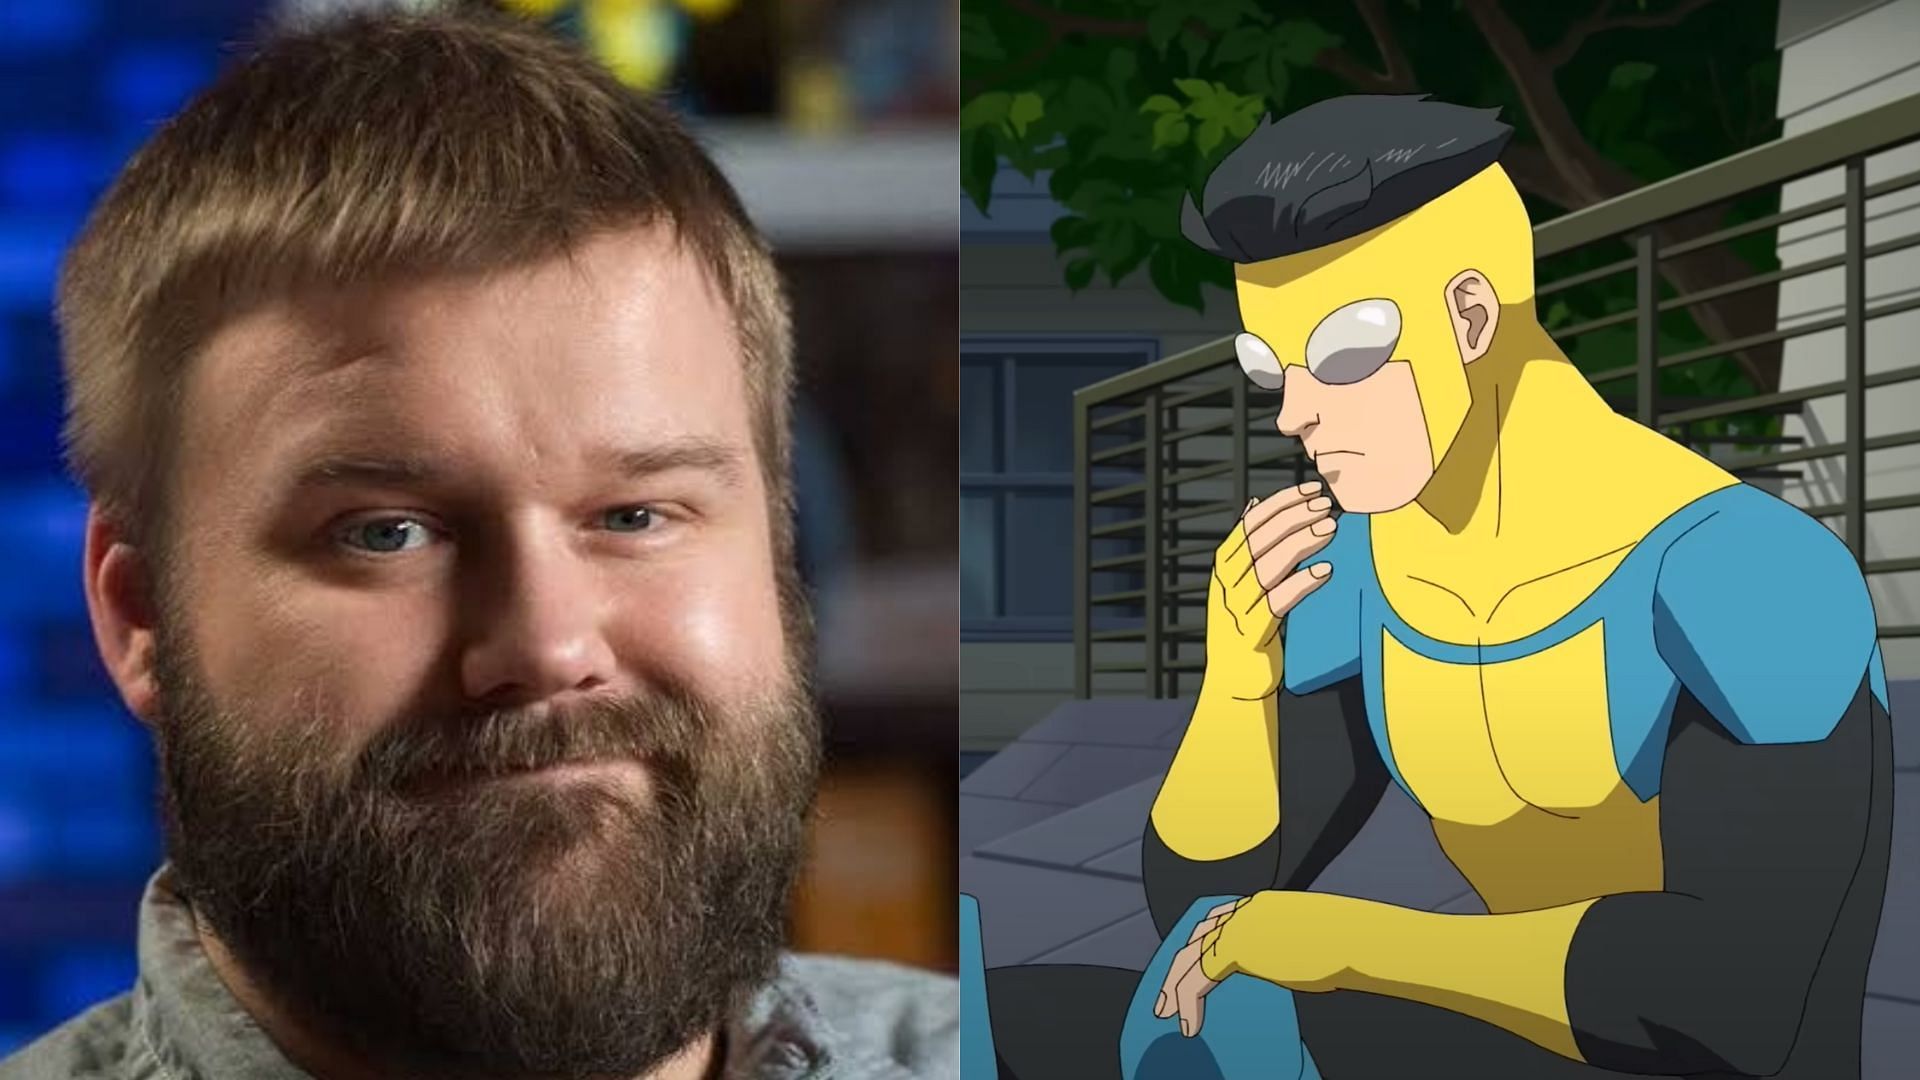 Robert Kirkman is the creator if the Invincible series (Image via Instagram/ @robertkirkman_official and YouTube/ @Prime Video)